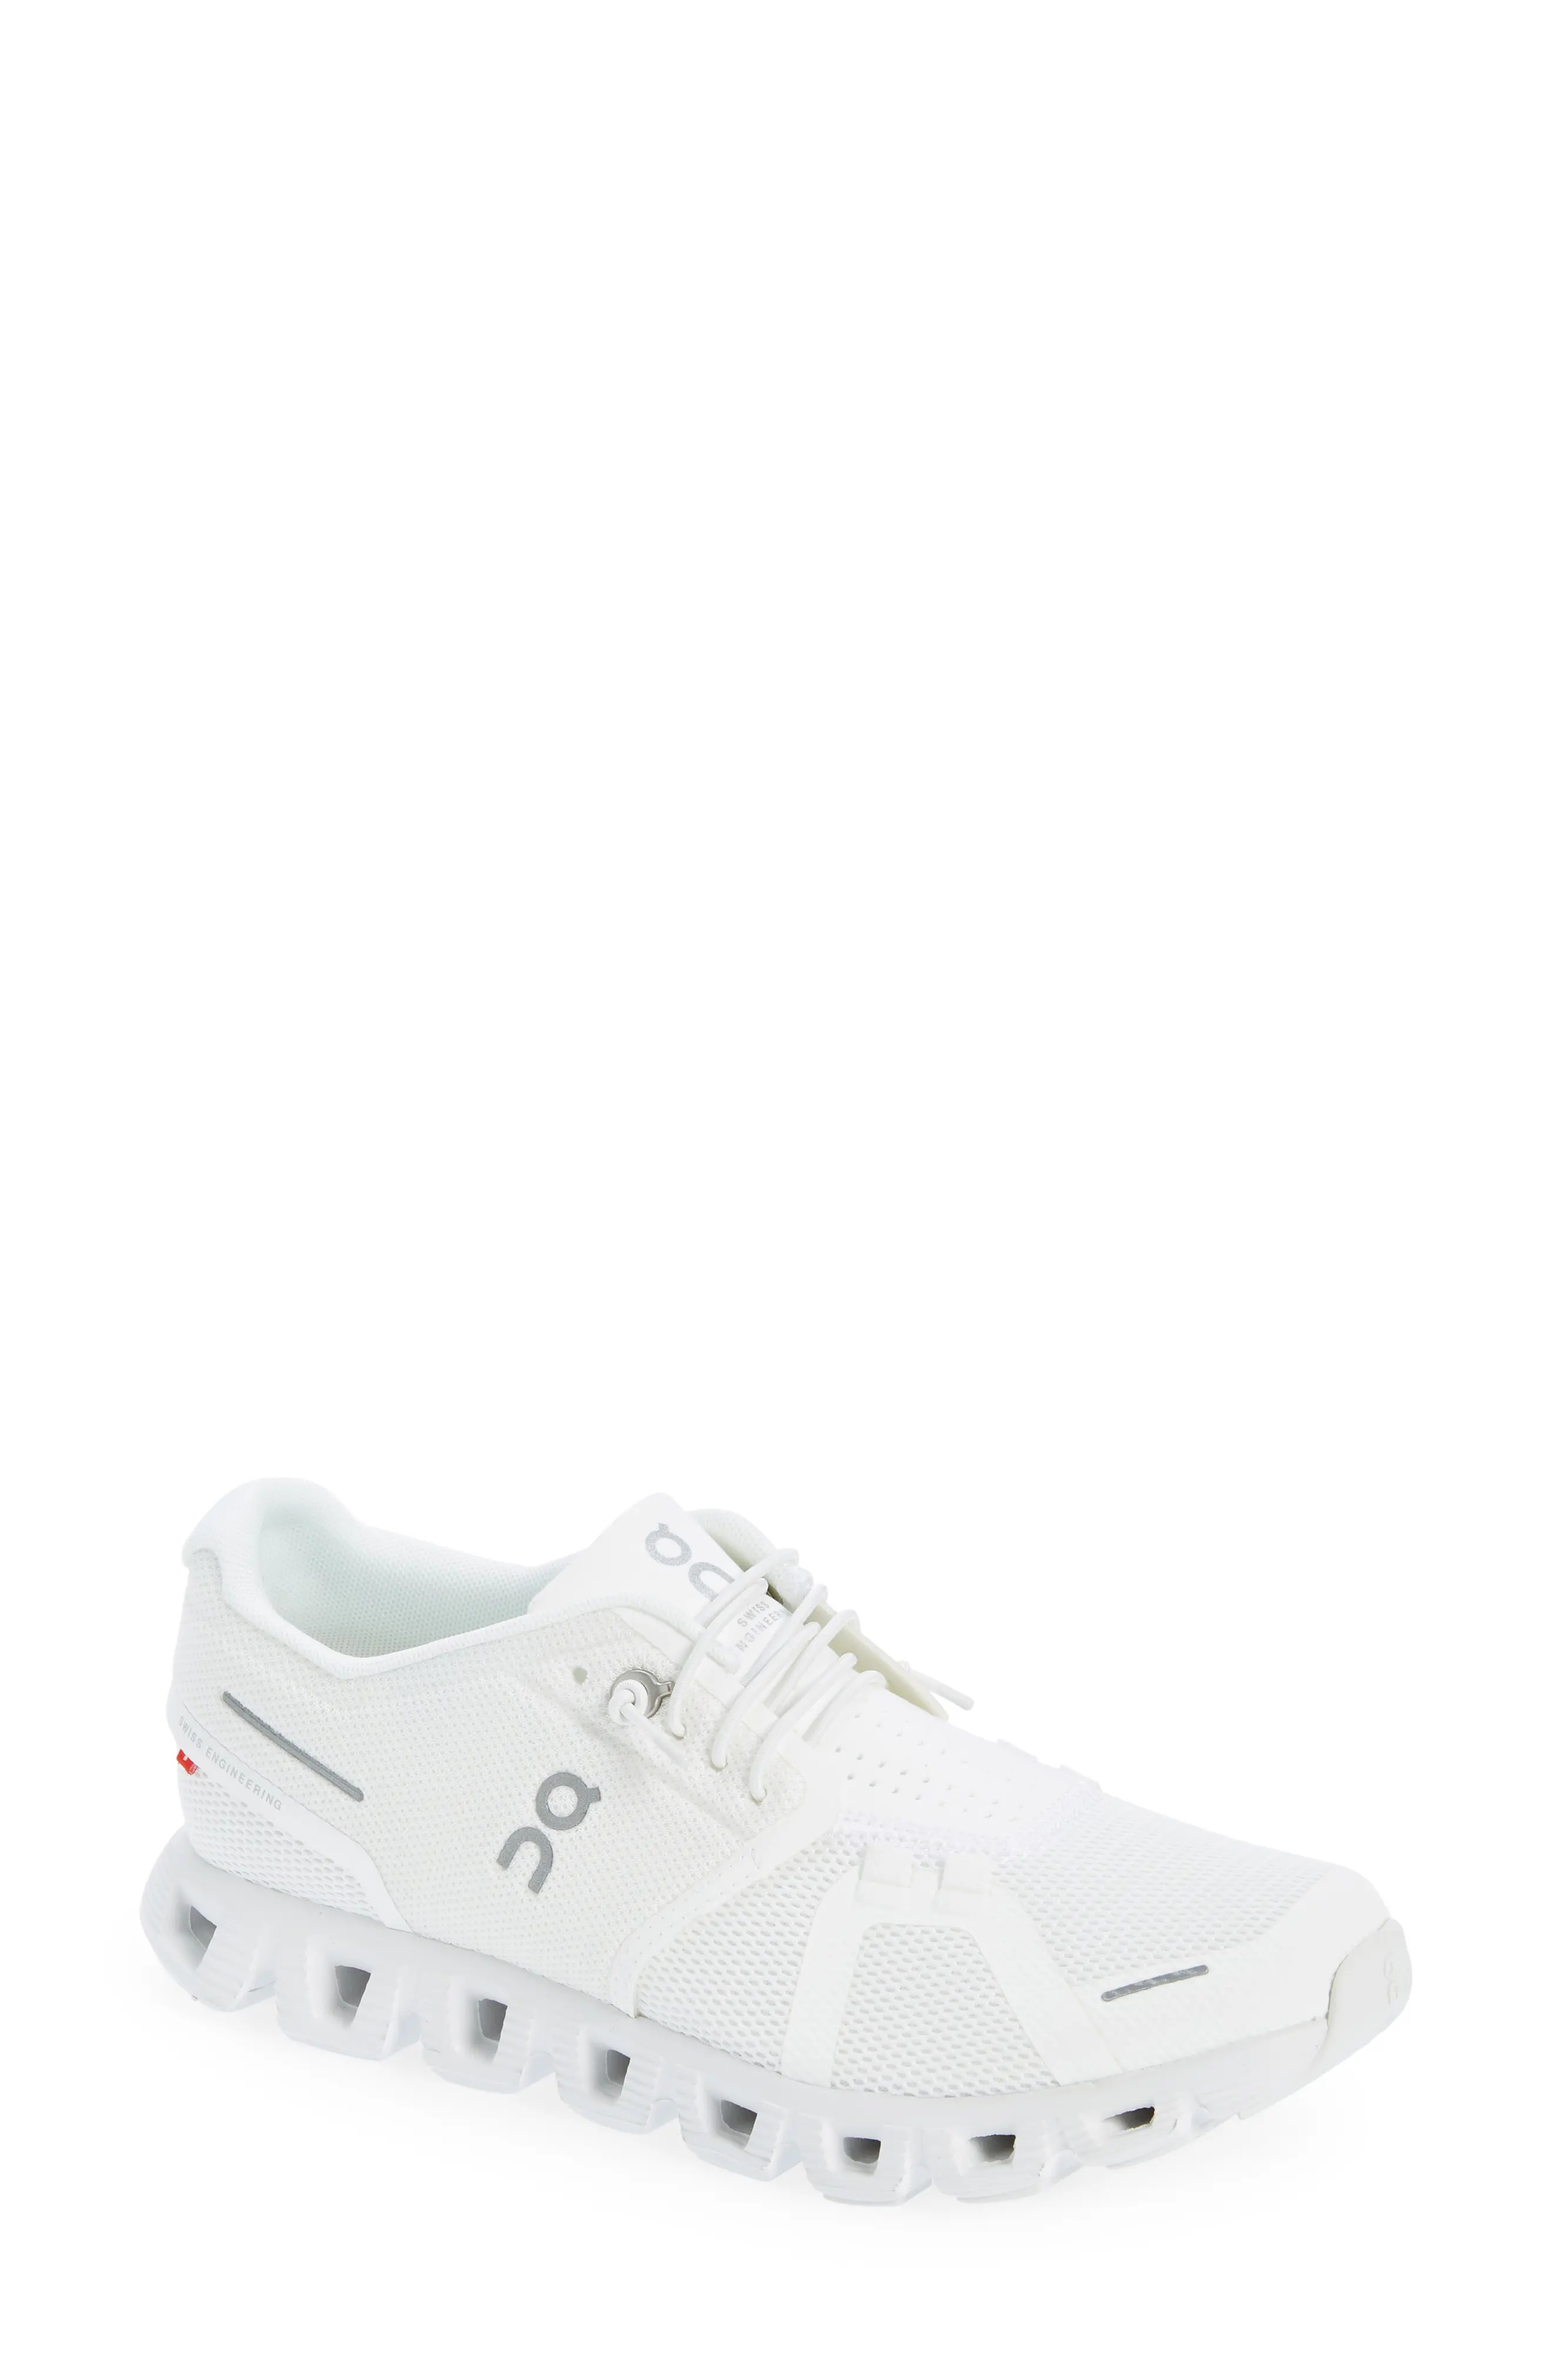 Cloud 5 Running Shoe in Undyed White/White - 1